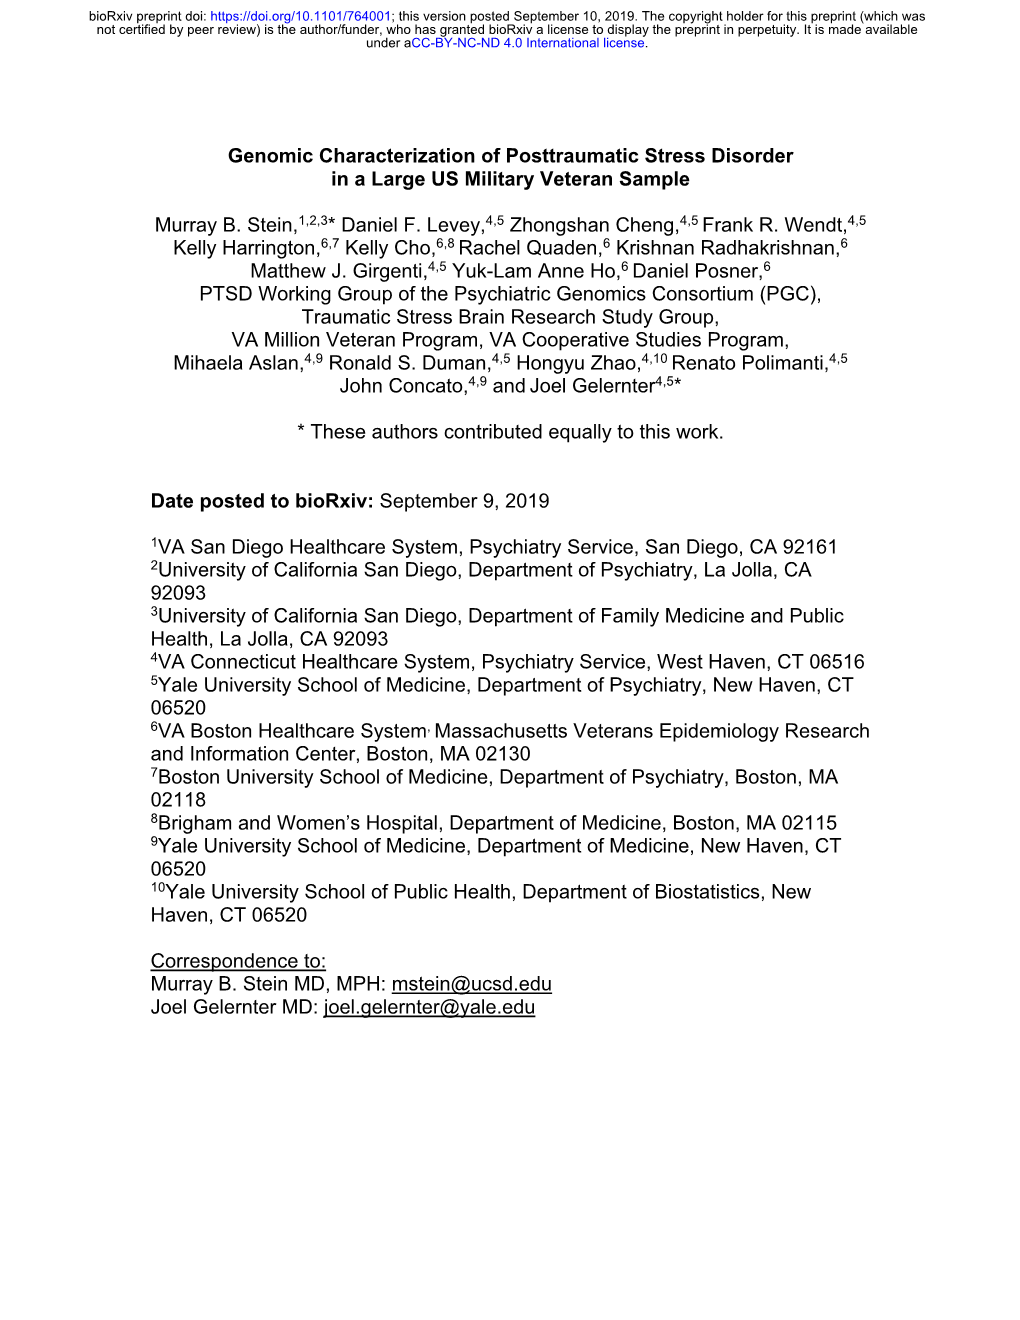 Genomic Characterization of Posttraumatic Stress Disorder in a Large US Military Veteran Sample